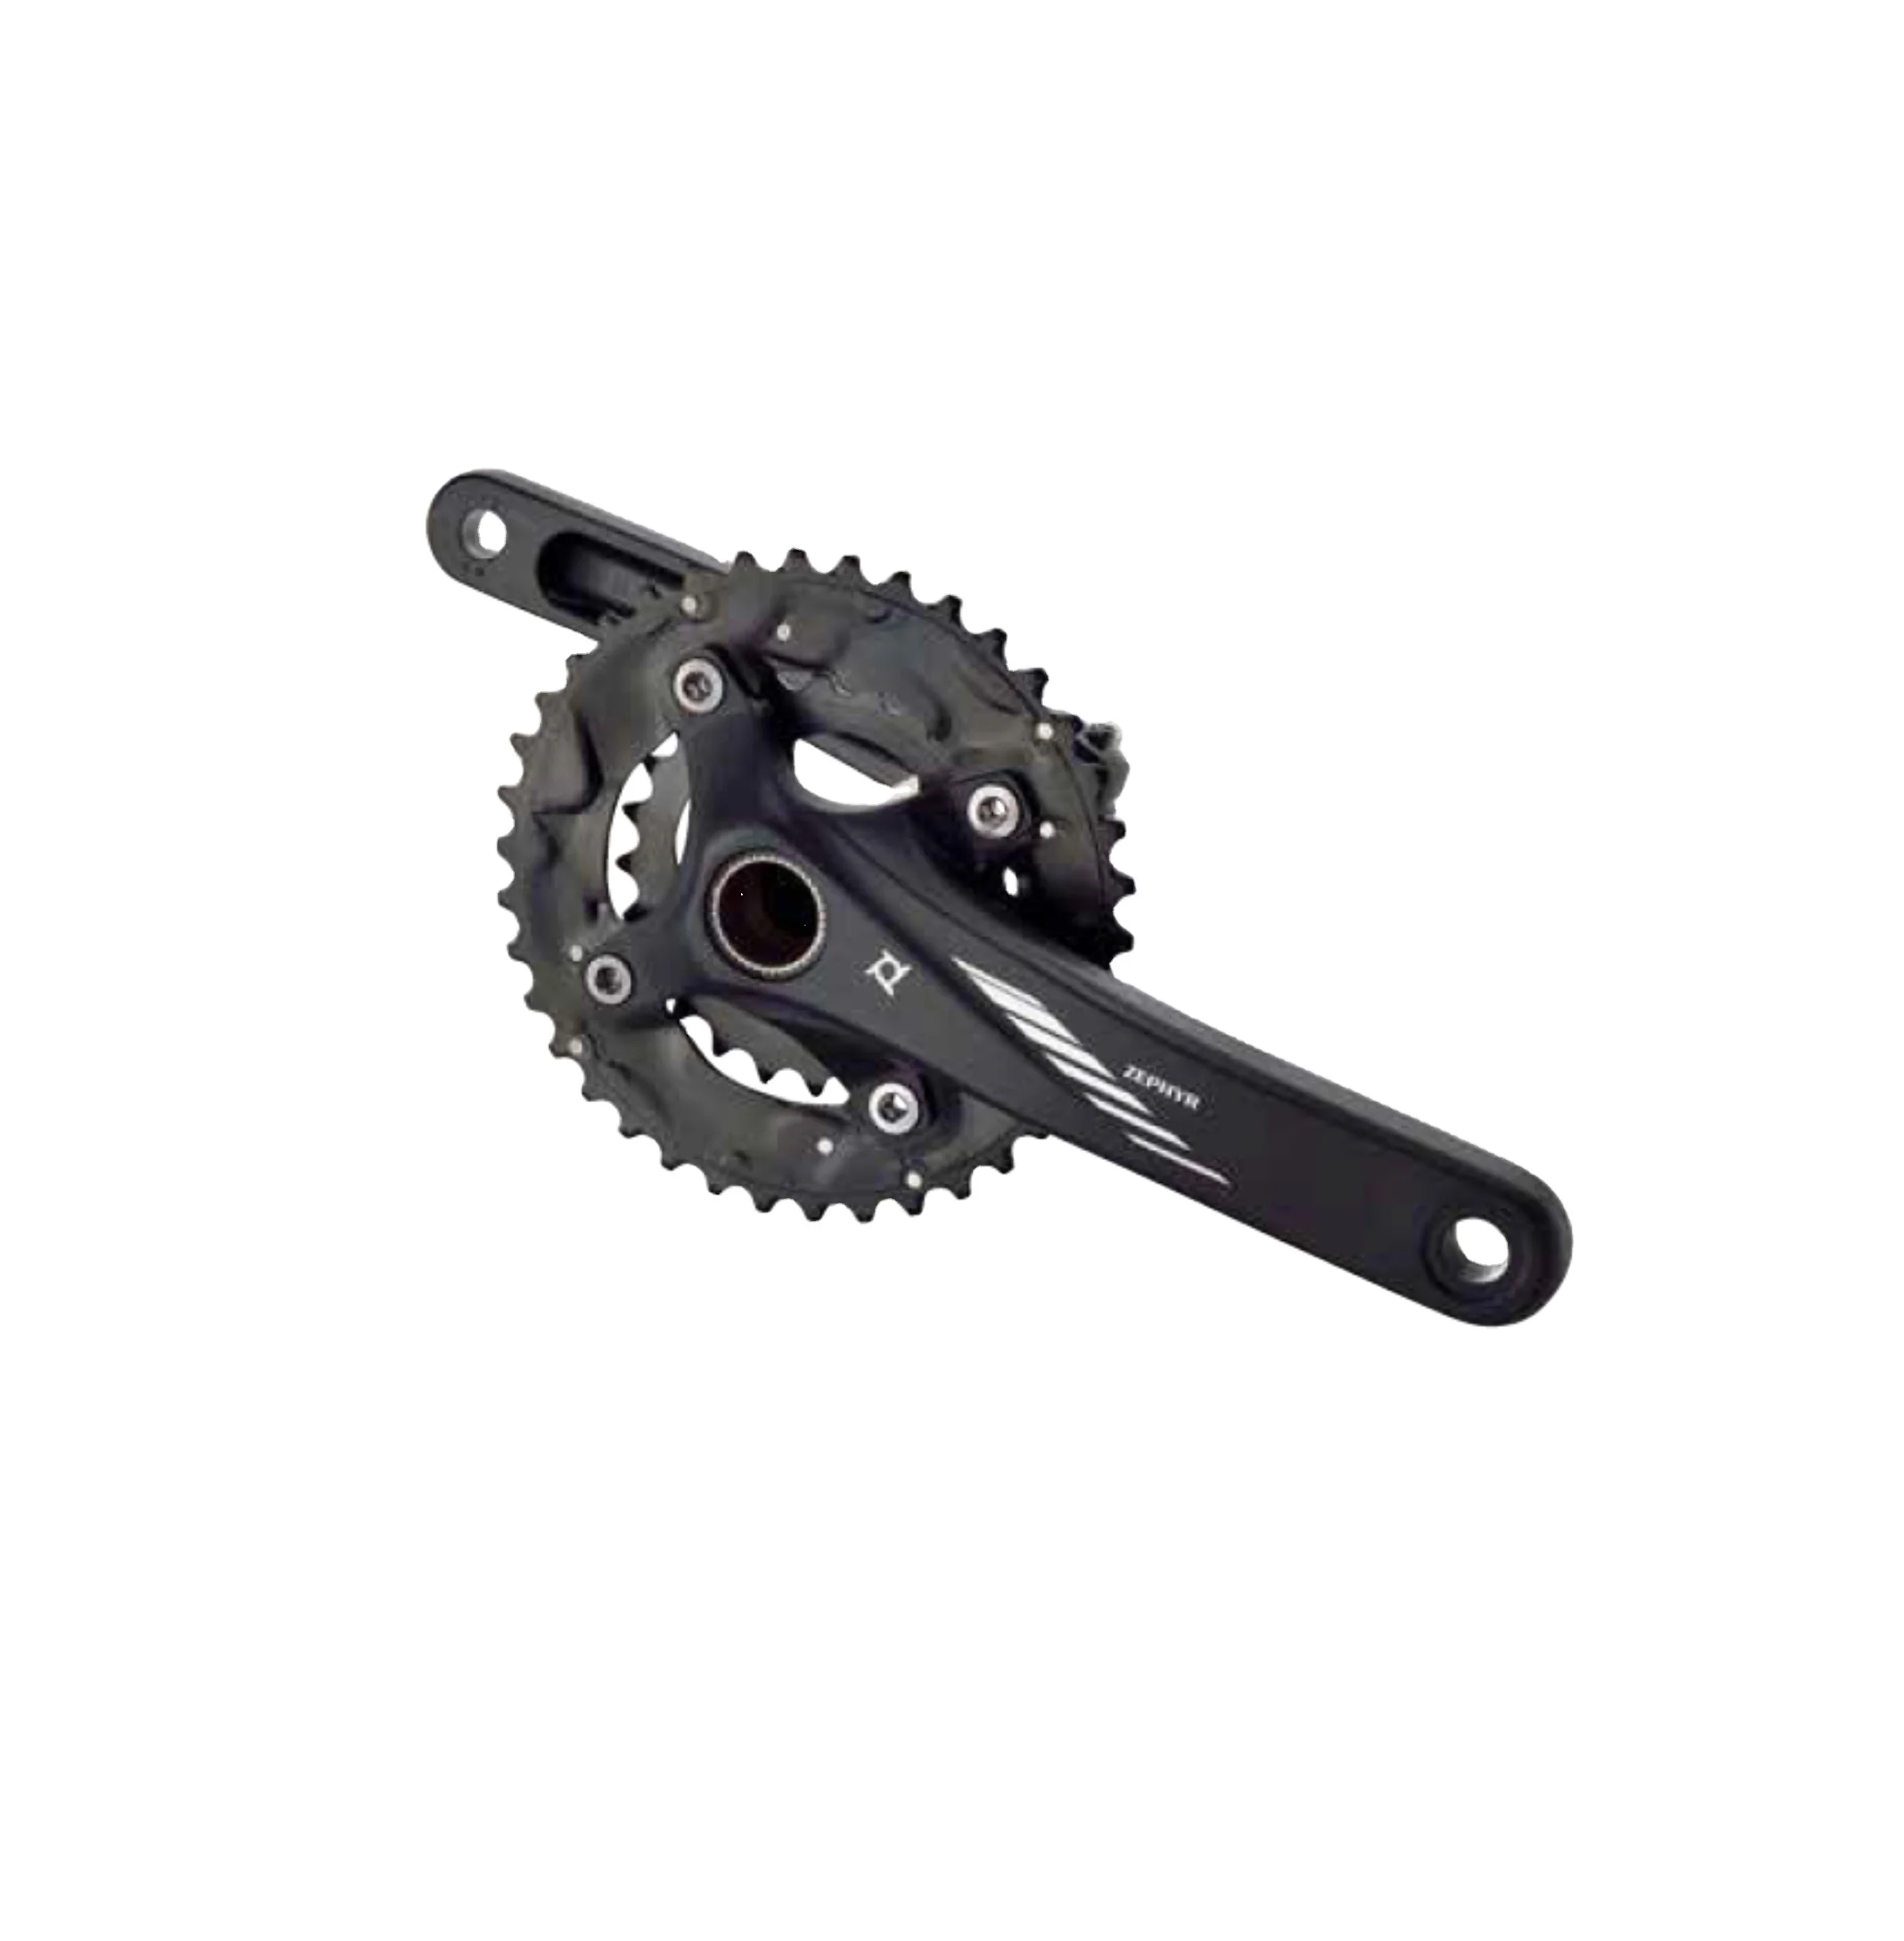 Source Prowheel High Quality Electric Snow Bicycle Parts 2pcs 10S 120mm Width Fat Bike Crankset For Sale on m.alibaba